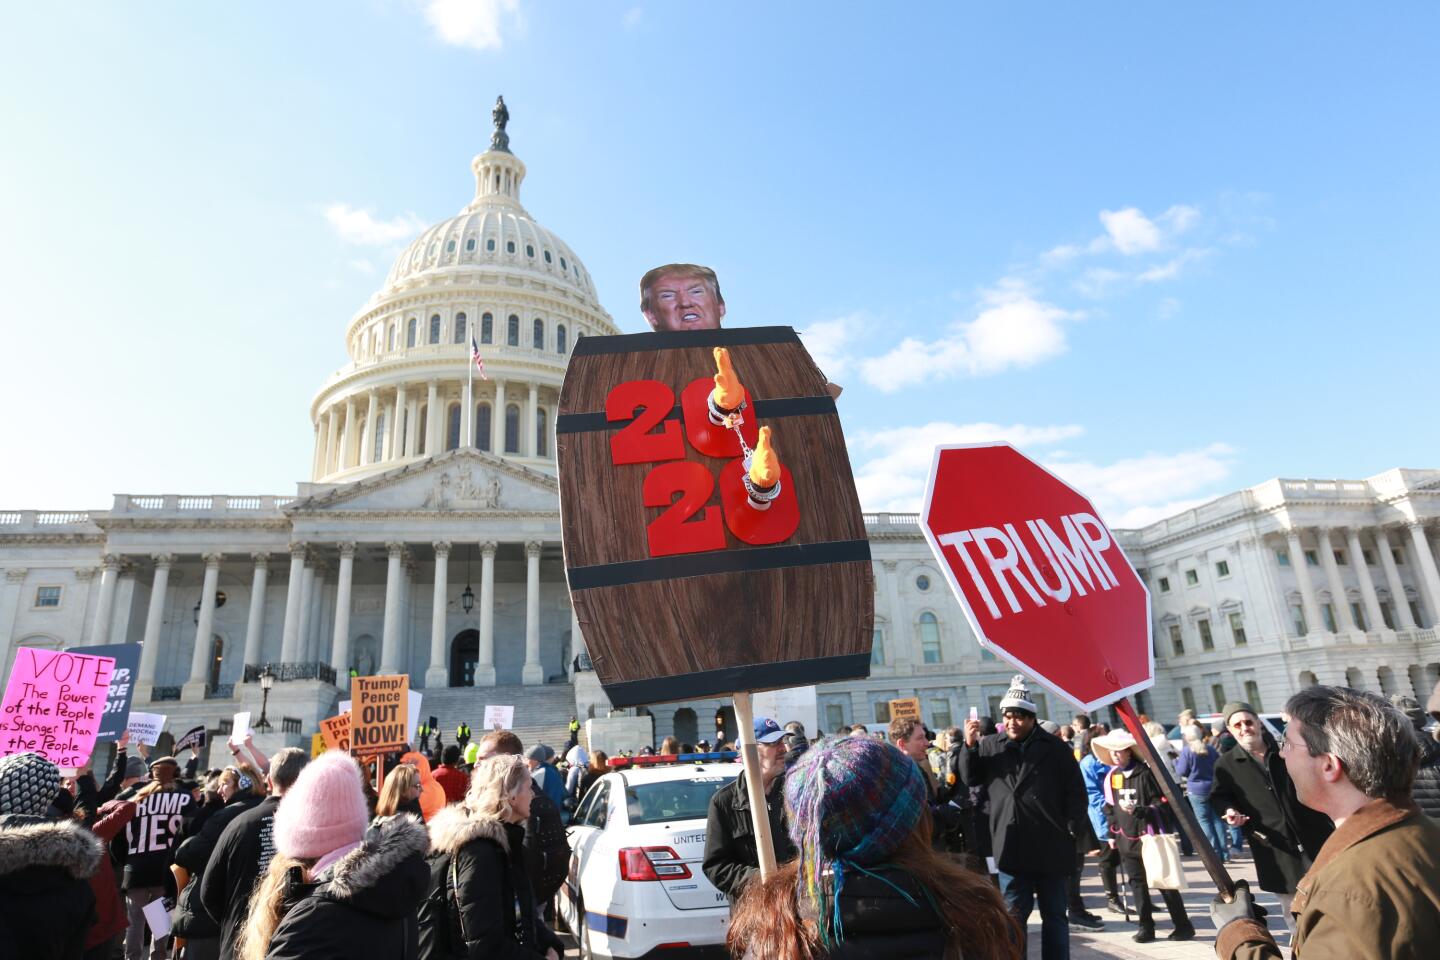 Hundreds swarm the Capitol to demand witnesses, evidence and the impeachment of President Trump in Washington, D.C., on Wednesday.